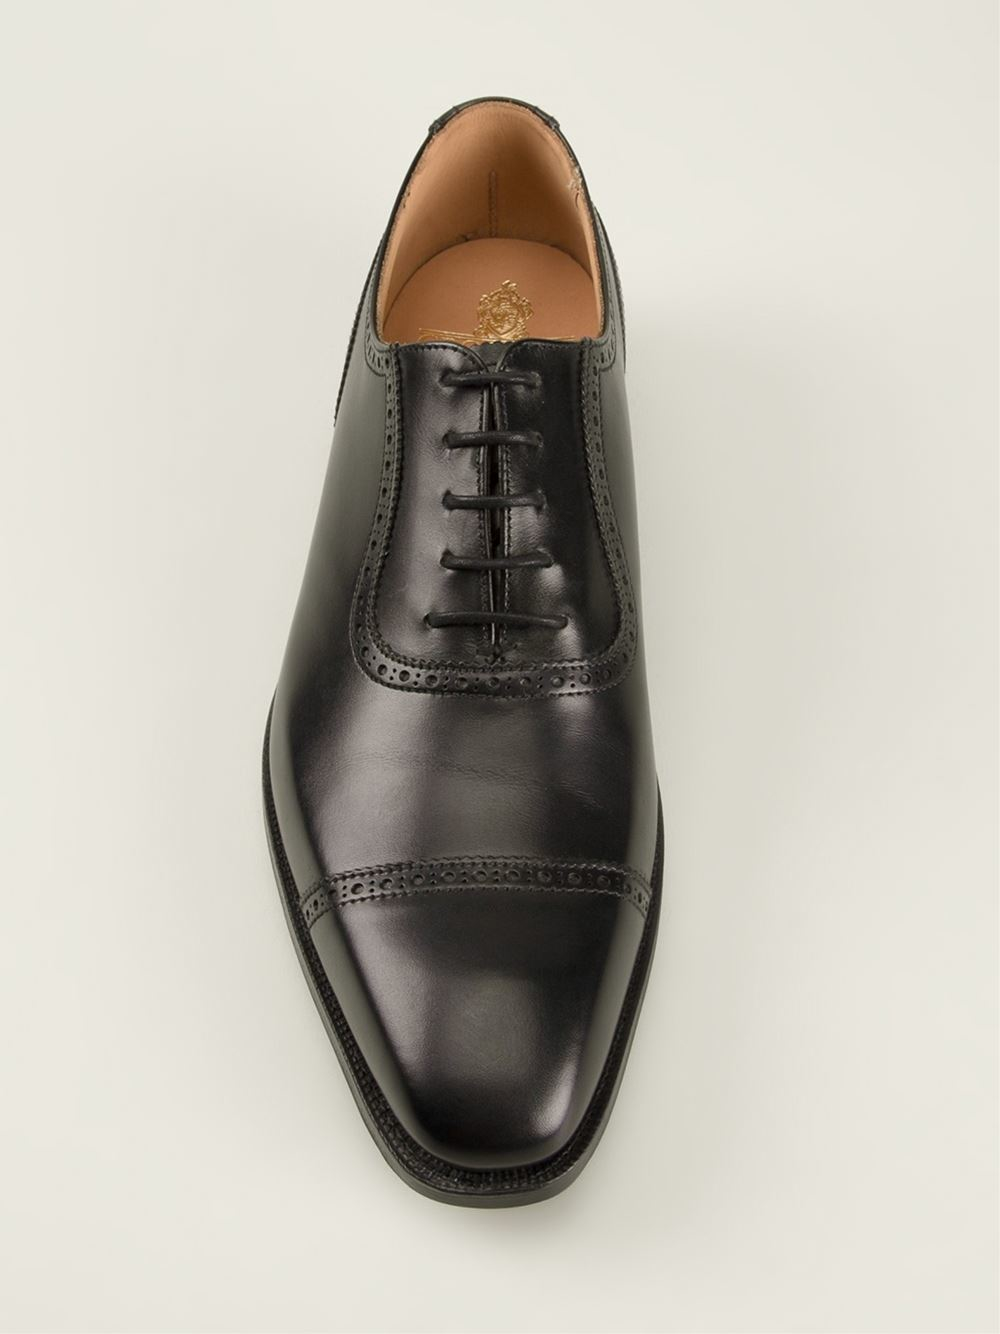 Lyst - Crockett And Jones Westbourne Leather Oxford Shoes in Black for Men